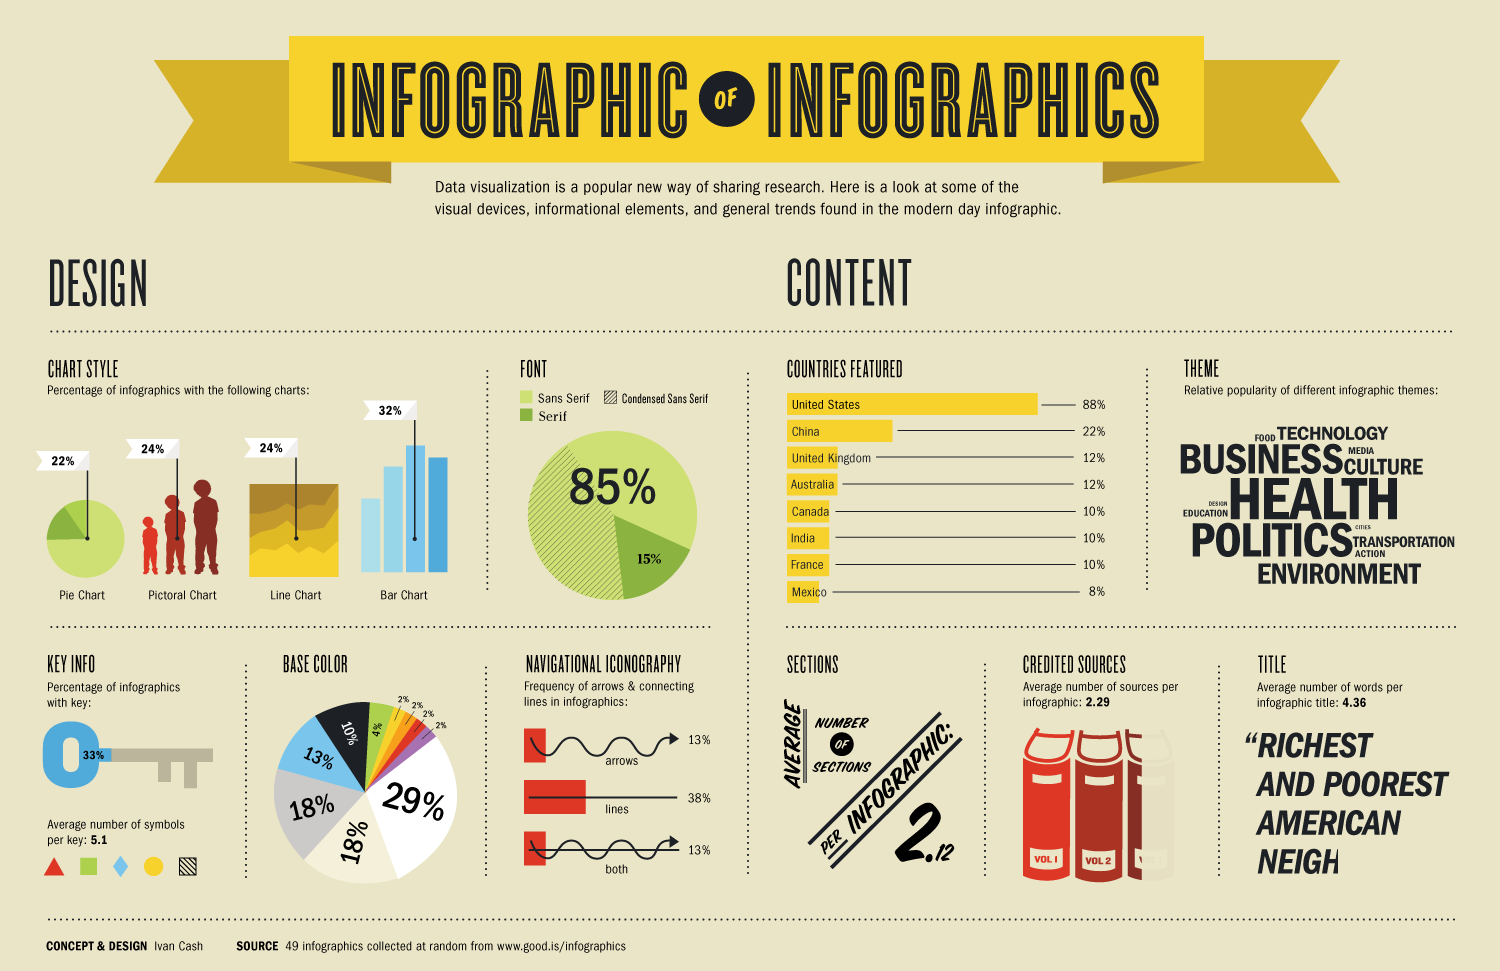 12 Good Infographic Design Images